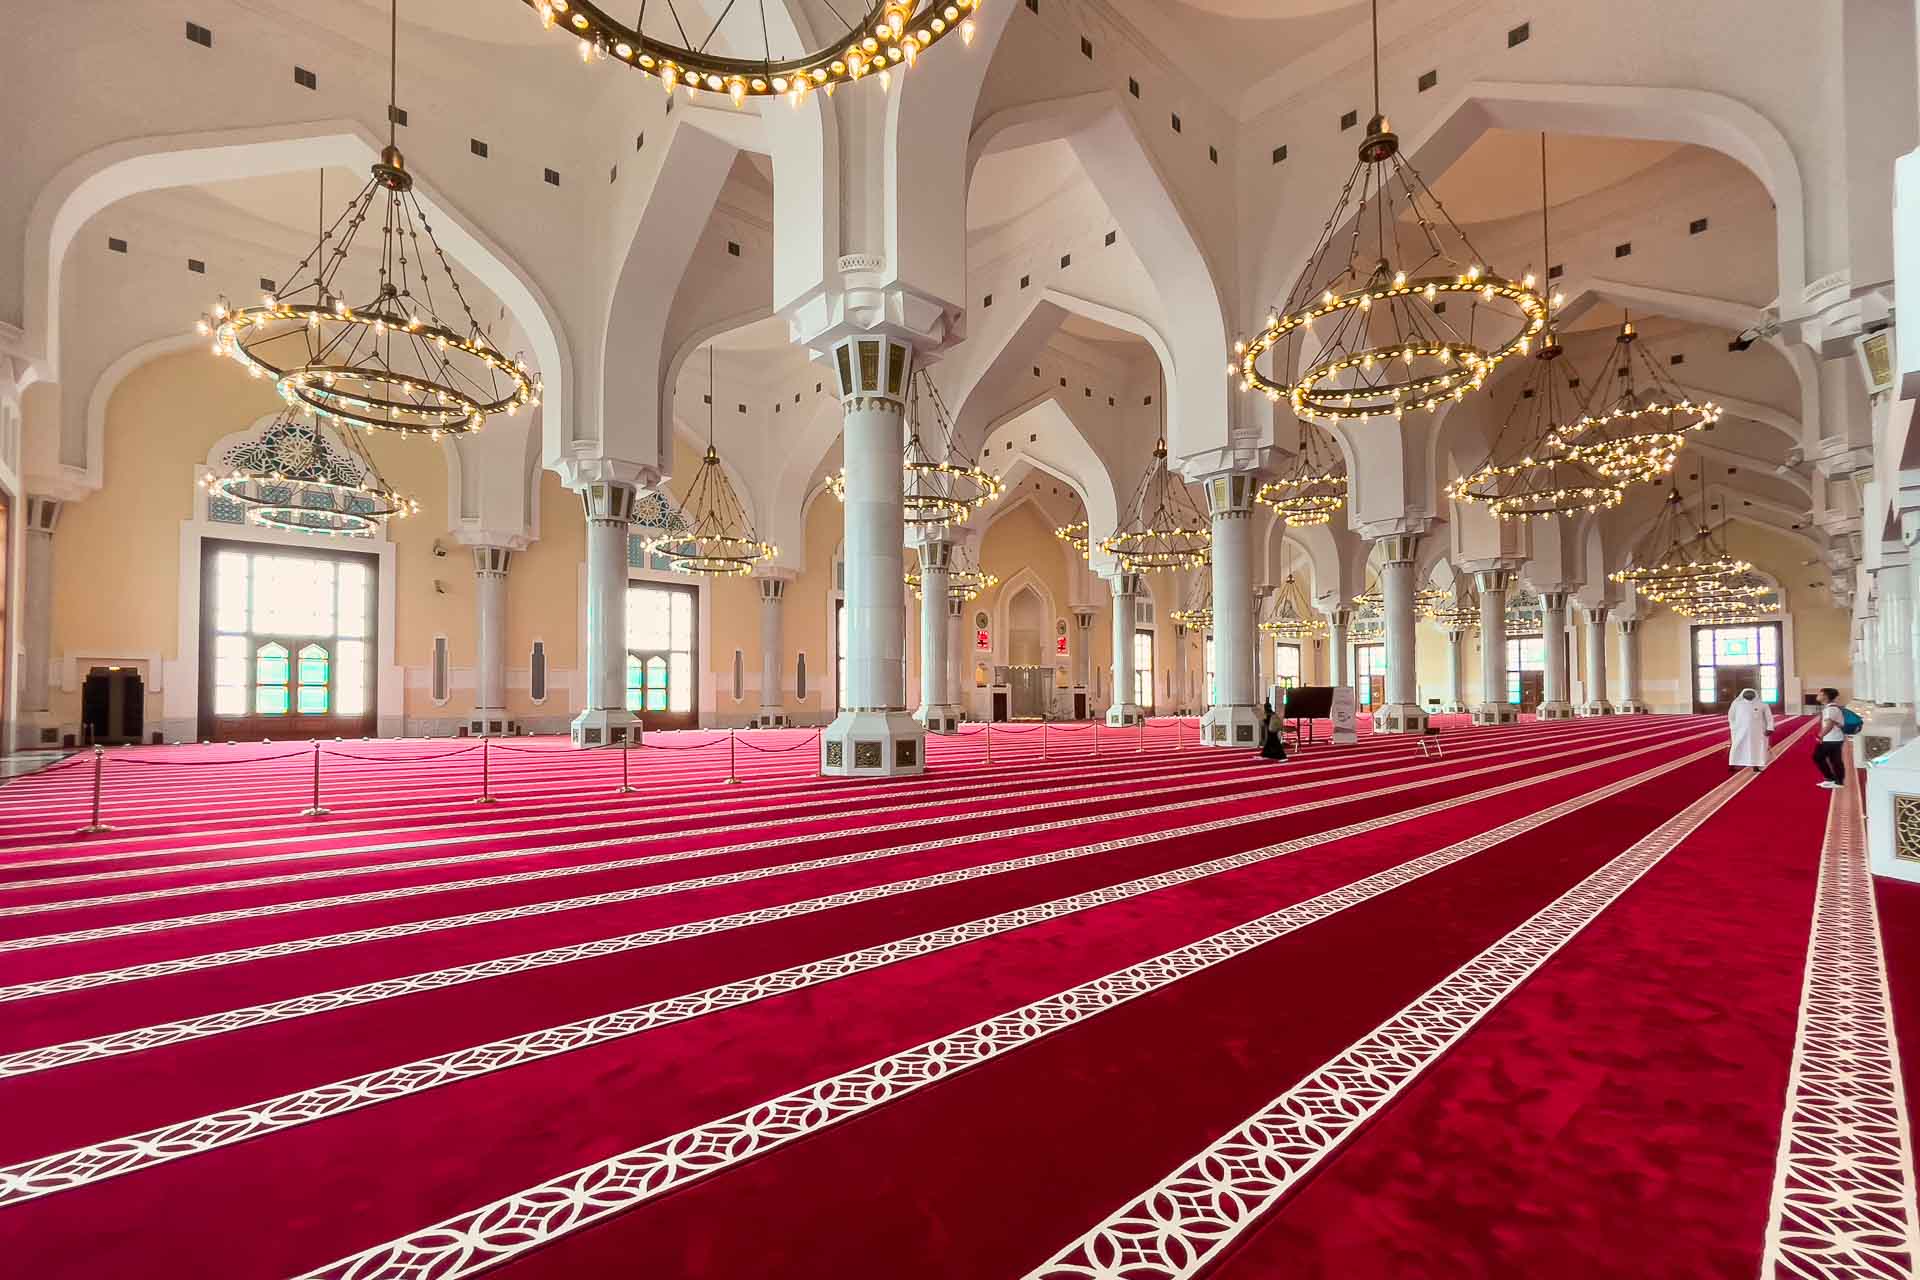 Inside the Grand Mosque in Doha with a large red carpet and islamic architecture